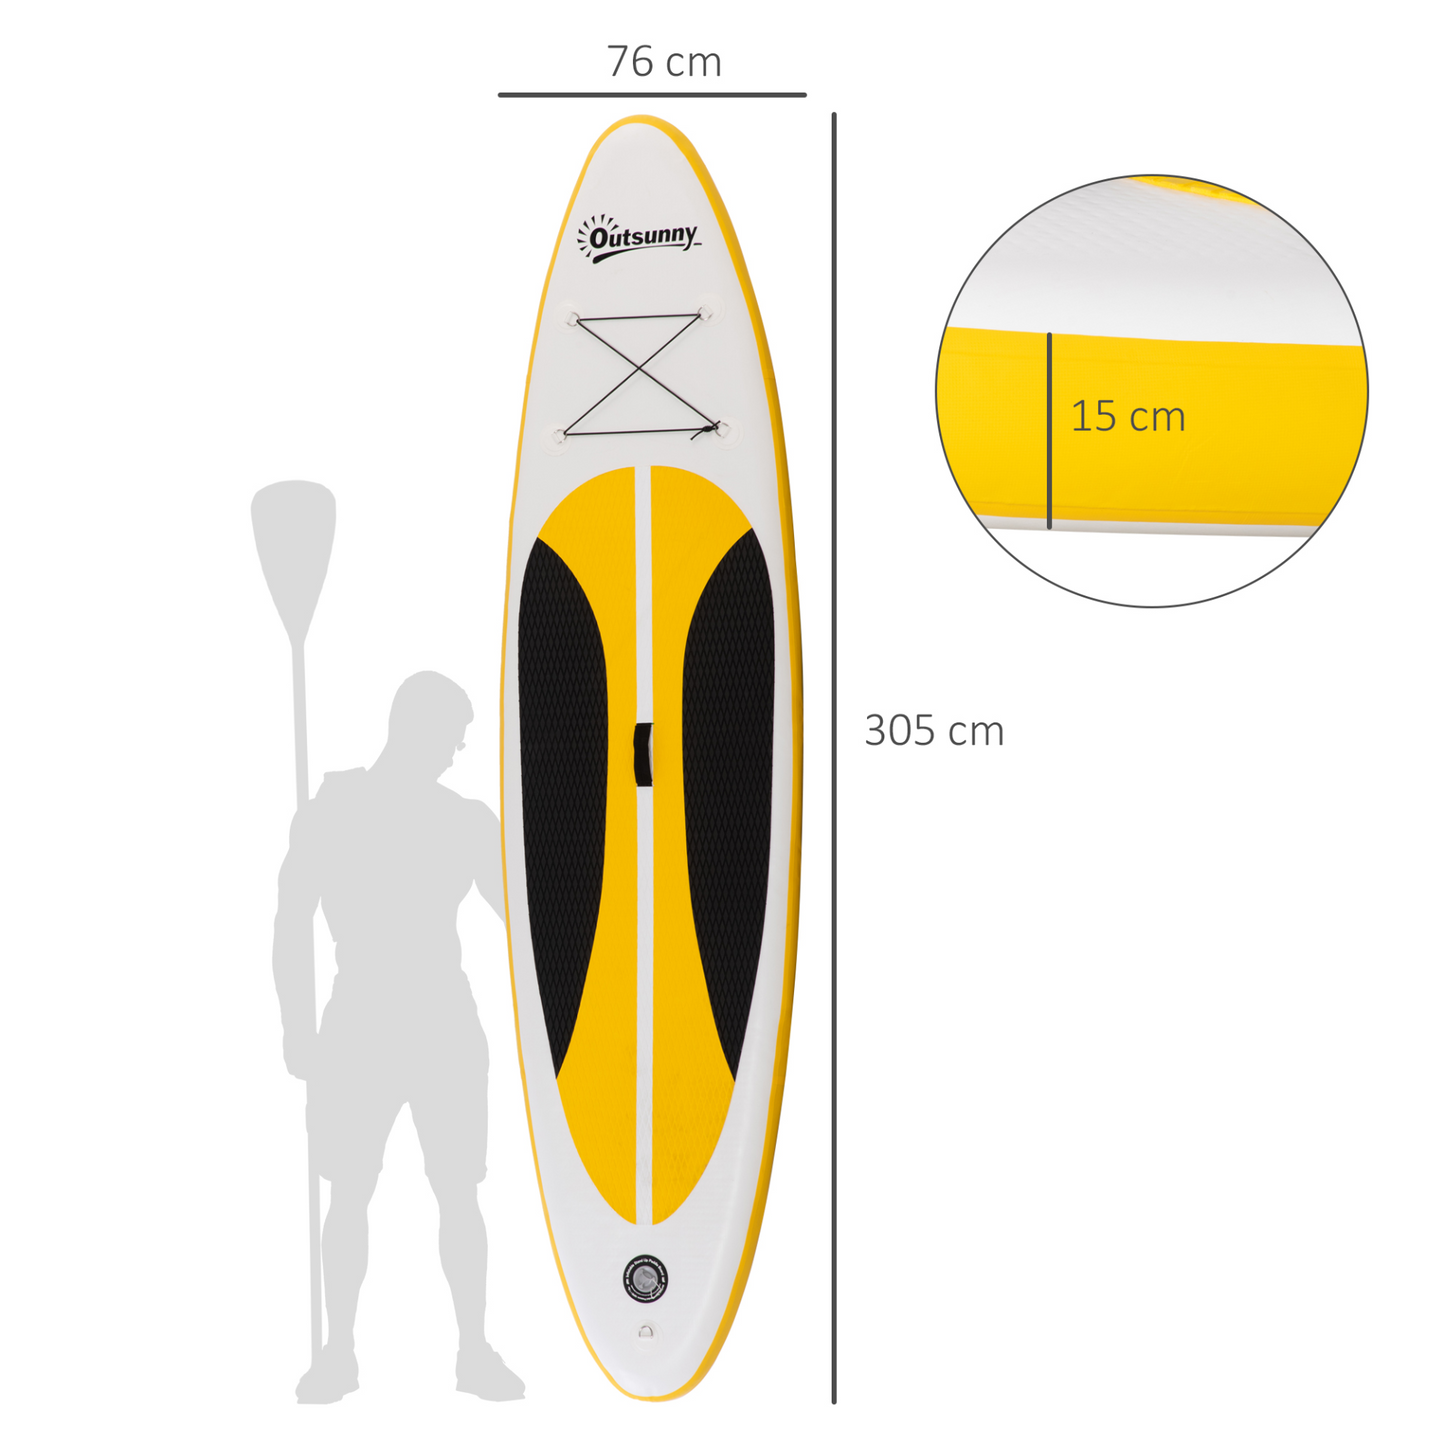 Outsunny 10' x 30" x 6" Inflatable Paddle Stand Up Board, 1.65-2.15M Adjustable Aluminium Paddle Non-Slip Deck Board, with ISUP Accessories & Carry Bag, 305L x 76W x 15H cm, White